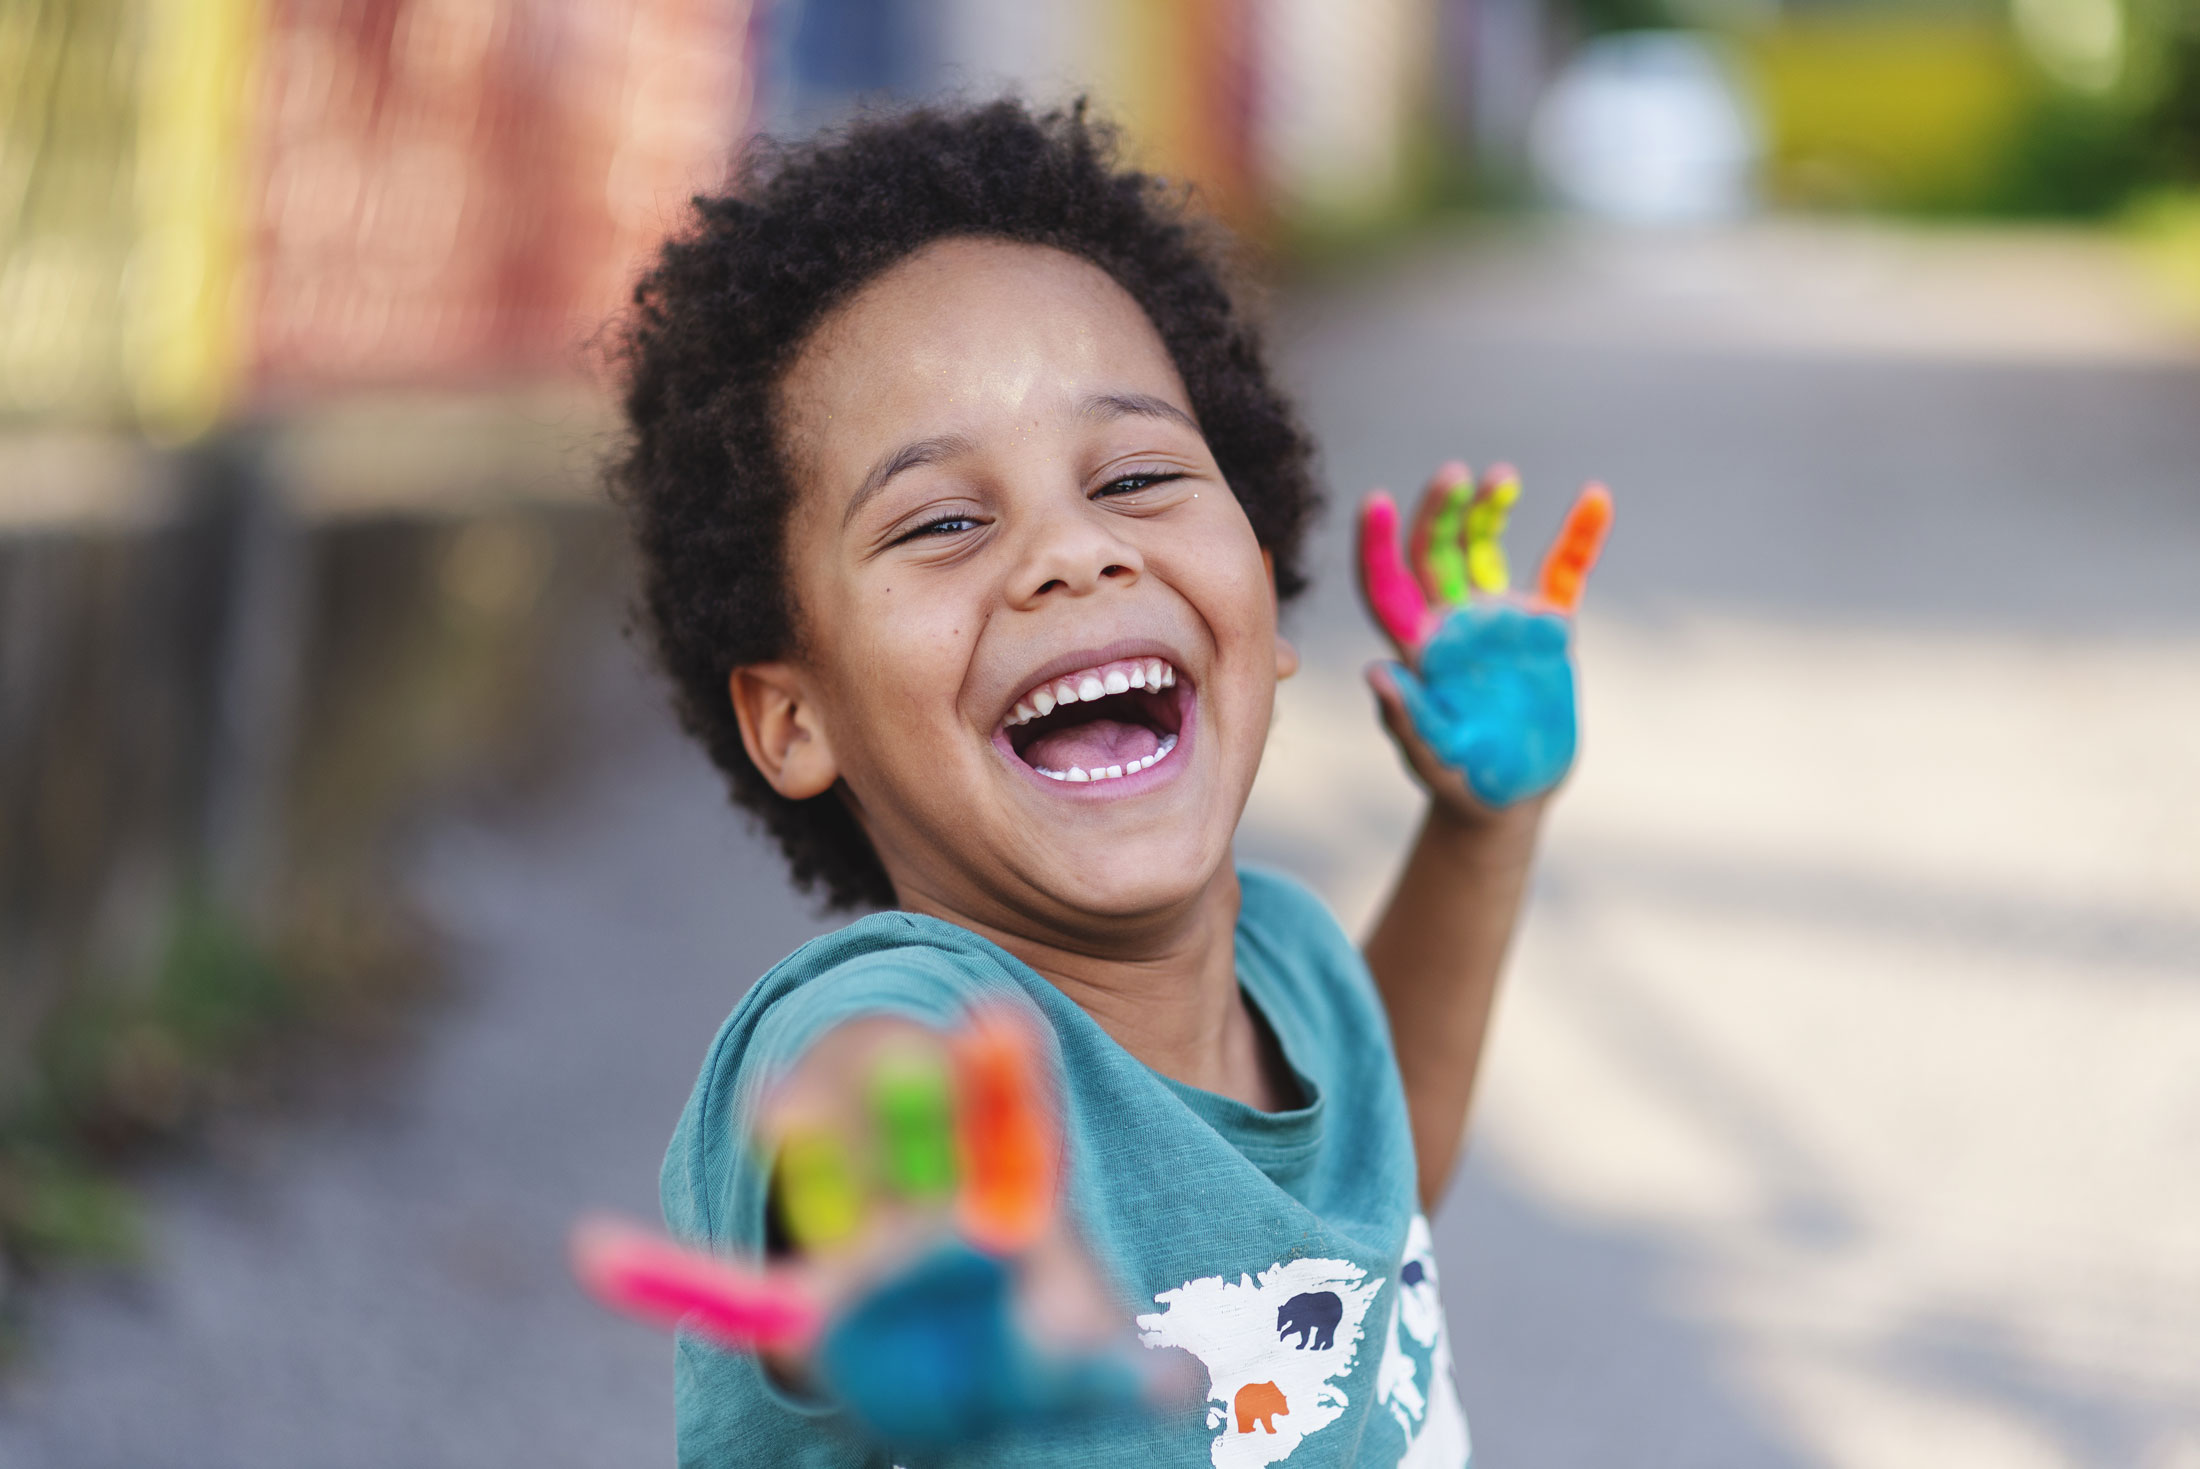 Child smiling with paint on their hands